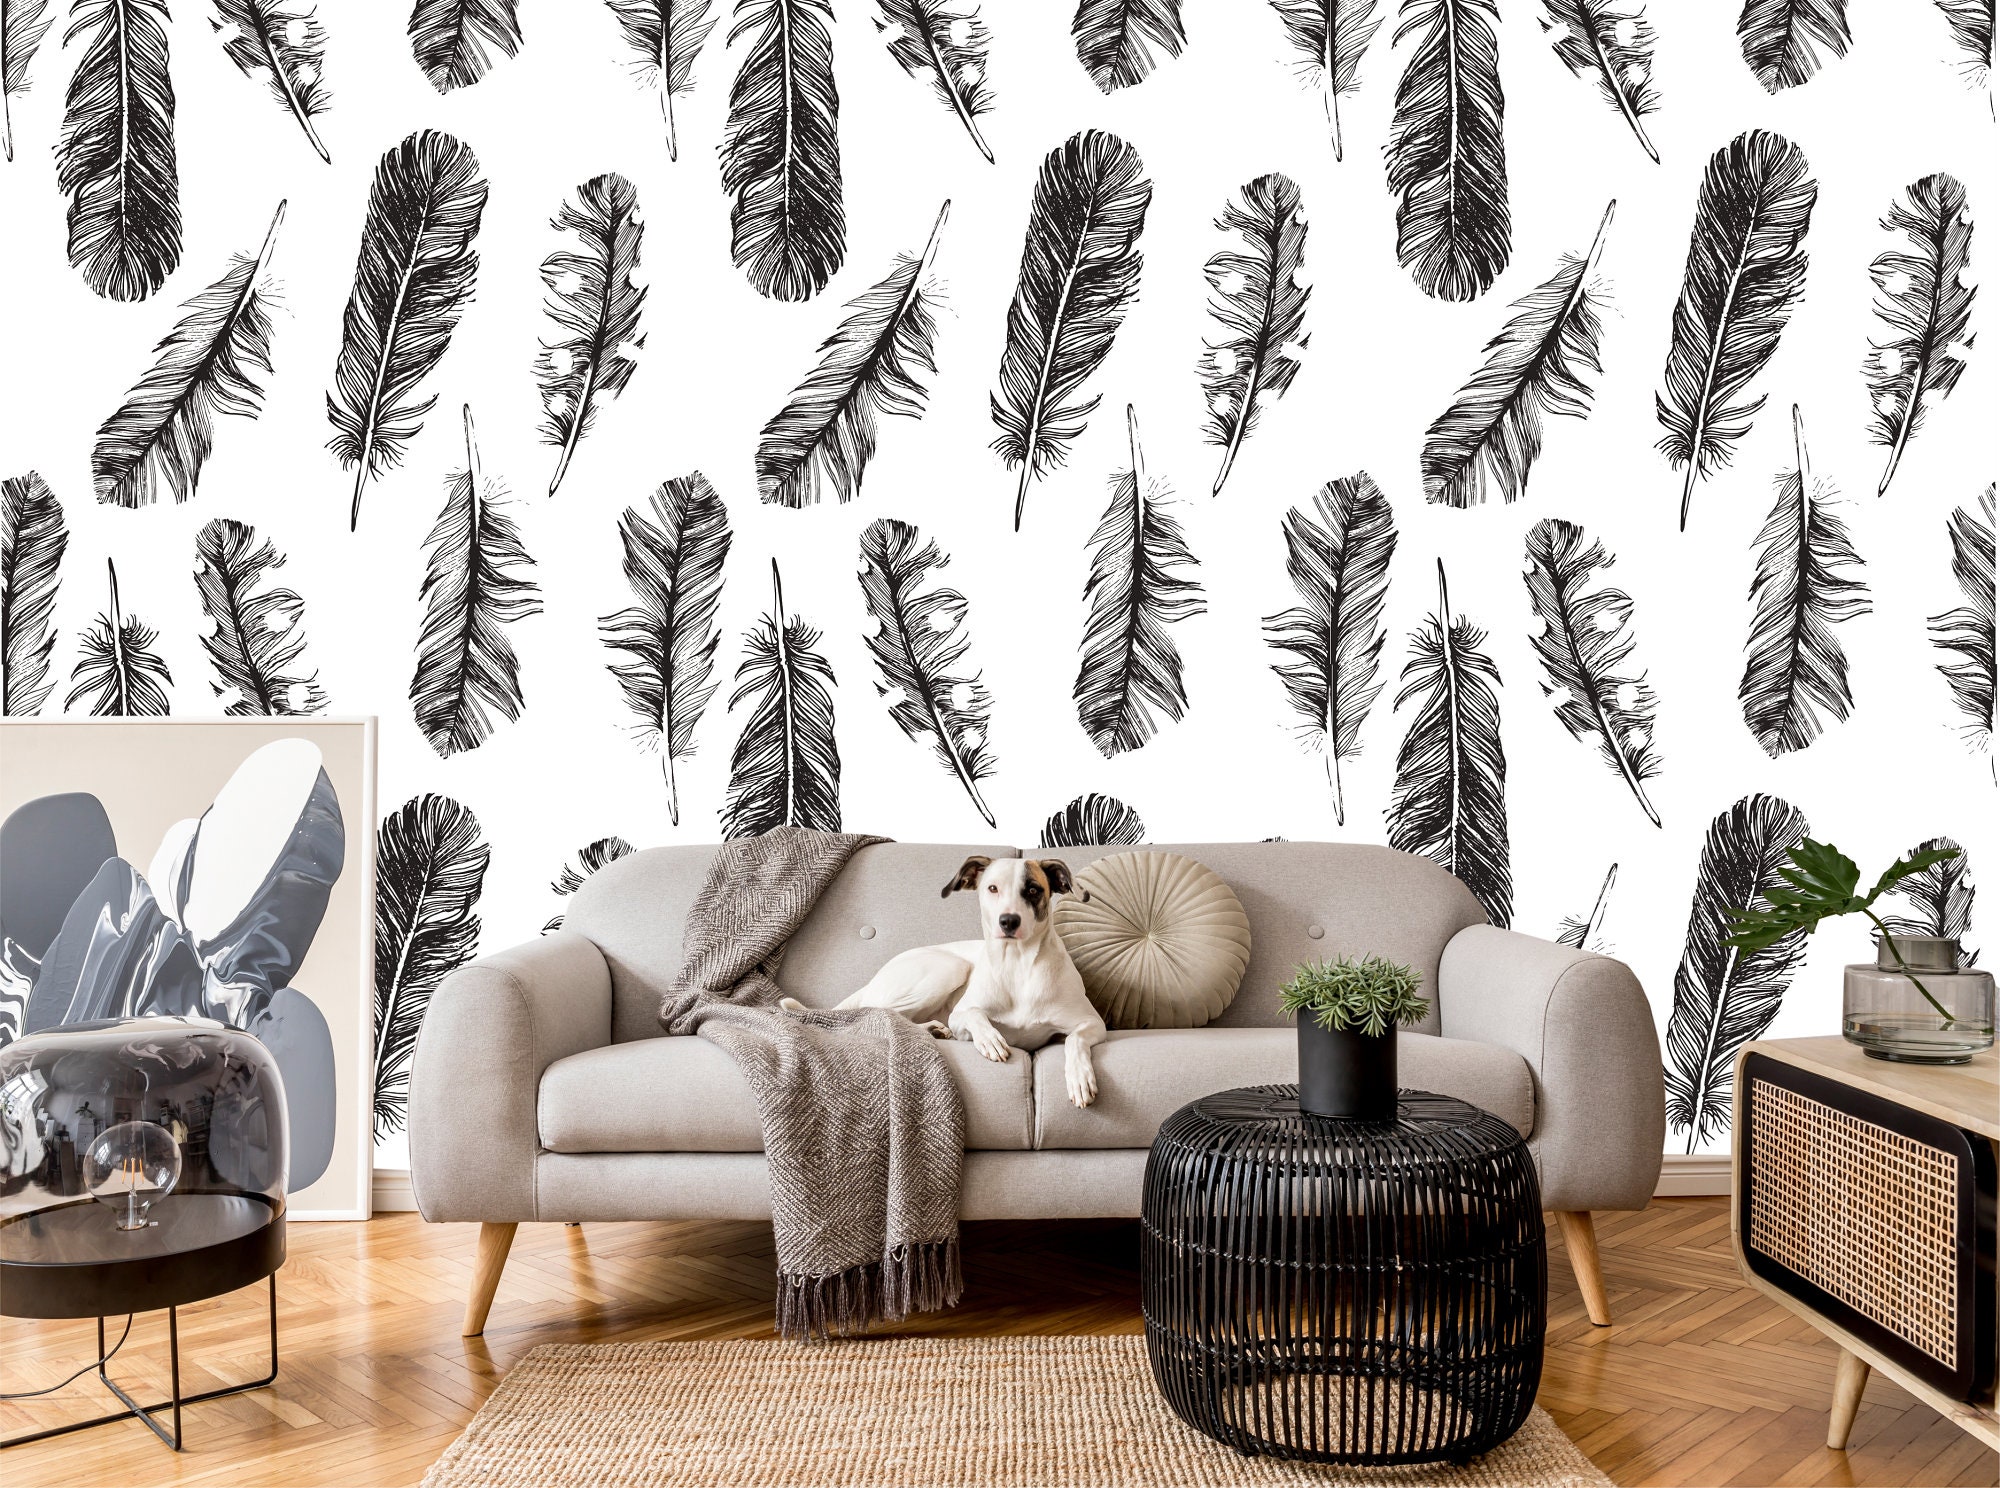 black and white feather wallpaper